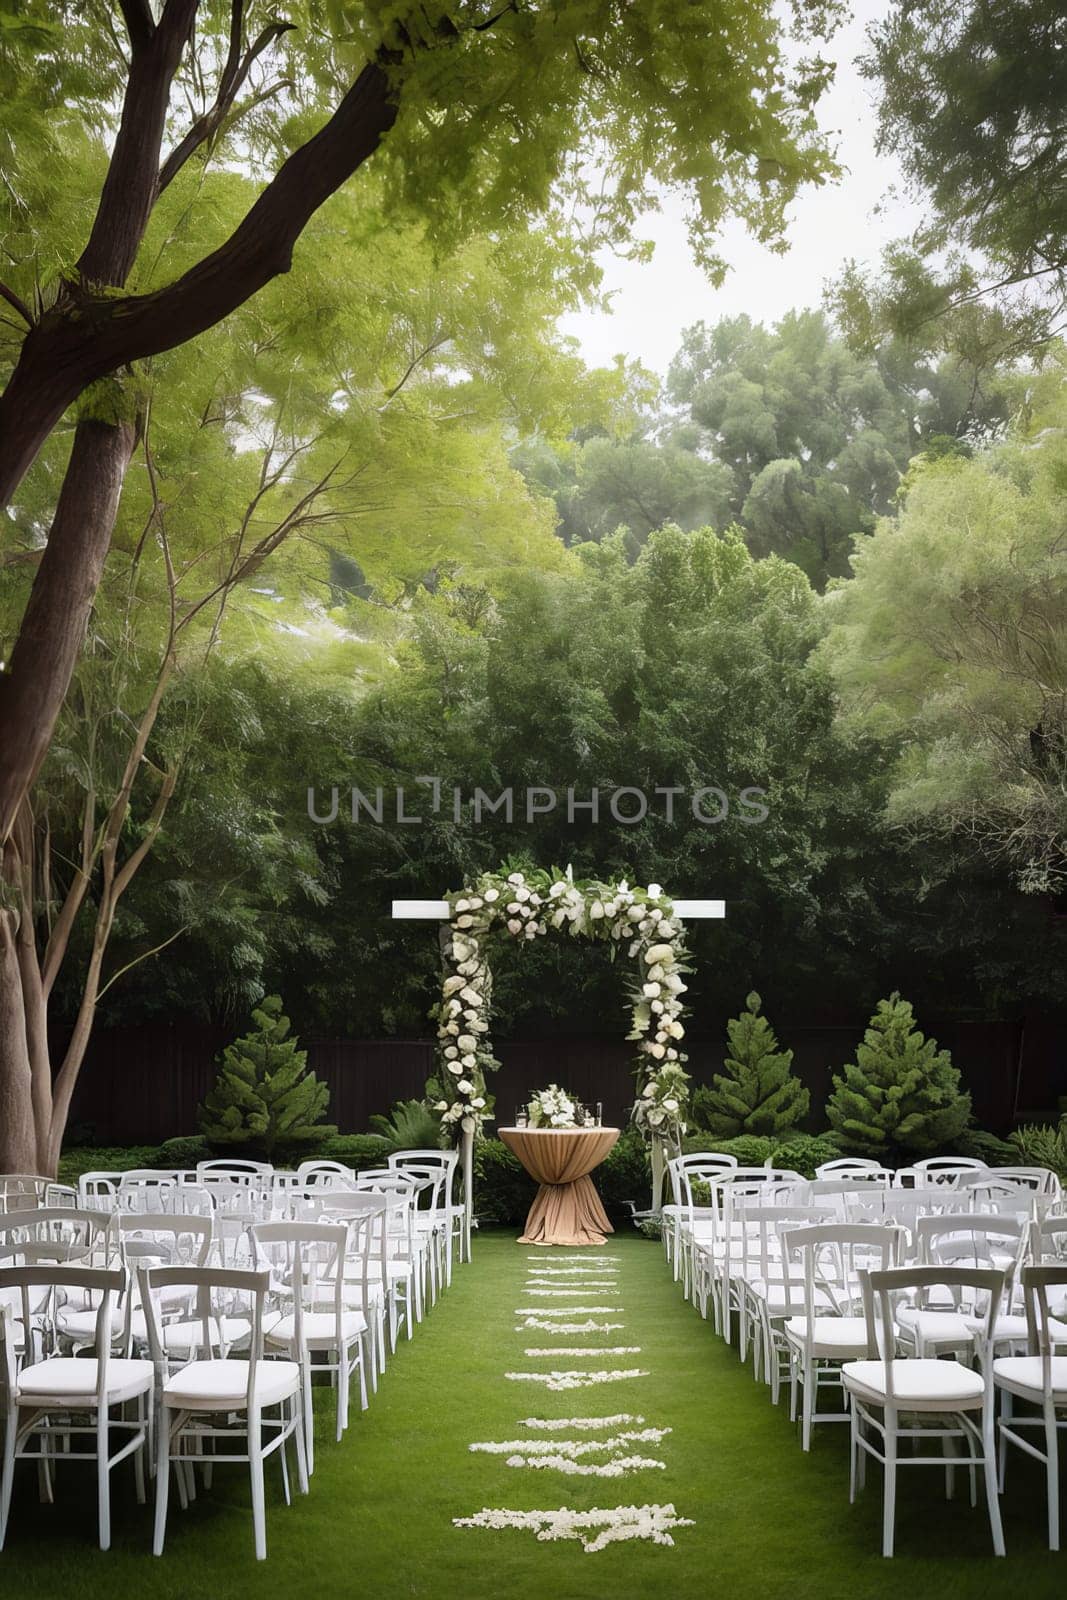 Perfect Venue for a Wedding: Minimalism and Celebration Under the Open Sky.